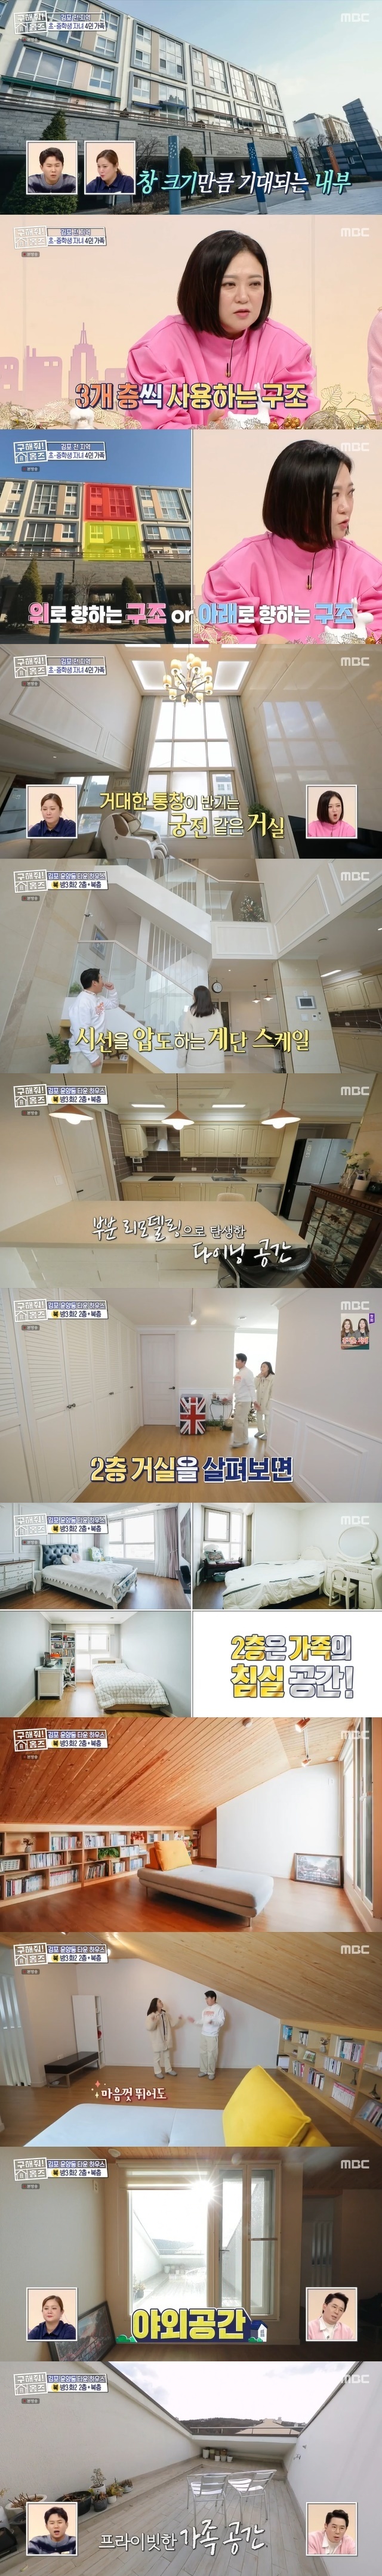 The 75,000-dollar Gimpo Townhouse was chosen by The Client.MBC entertainment Where is My Home (hereinafter referred to as Homes), which was broadcast on December 26, featured The Client, who wants to move to Gimpo, where her husbands company is, to increase her time with Family.The Client wanted three rooms with elementary and junior high schools and walkways nearby, and two or more toilets, and the budget was up to 700 million won.The team introduced the townhouse complex in Unyang-dong, Gimpo-si, where the park is located at 10 minutes walk and 15 minutes walk.From the exterior, the luxurious house had a palace-like living room with a huge grass-toe and chandelier lights in the interior; the house was named Gimpoever Unyang Castle.Ive seen this house too, Duck team leader Kim Sook confessed to Cody, who said, This house basically uses three floors.The upper part is to use up to 3, 4, and 5 floors, and the lower part is to use the underground, the first and second floors. The actual house had a grand, luxurious staircase indoors that could be reached on three floors, as Kim Sook explained.Cody commented that wedding halls are home, I think Ive come to the palace, and I feel like every day I live in such a house.The kitchen was wide enough to hold a home party, and when I went upstairs, another living room came out, and on the second floor there were three rooms with system air conditioners in the city view.On the third floor, Jang Young-nam was applauded, and the double floor and open veranda of the high white-wood ceiling were opened.Jang Dong-min praised the house as Private because it is blocked by a wall on the side; the mountain shows the four seasons clearly in front of it. The price of the house was 750 million won for the Client limited lease.Kim Sook, who had been looking at the house himself, strongly recommended that Bok Tim put the house on the shortlist: I went to see that house exactly last year.It was the house that went up to the end. At that time, there were not a few properties.However, the team has nominated a large part of the dining space, not the house.